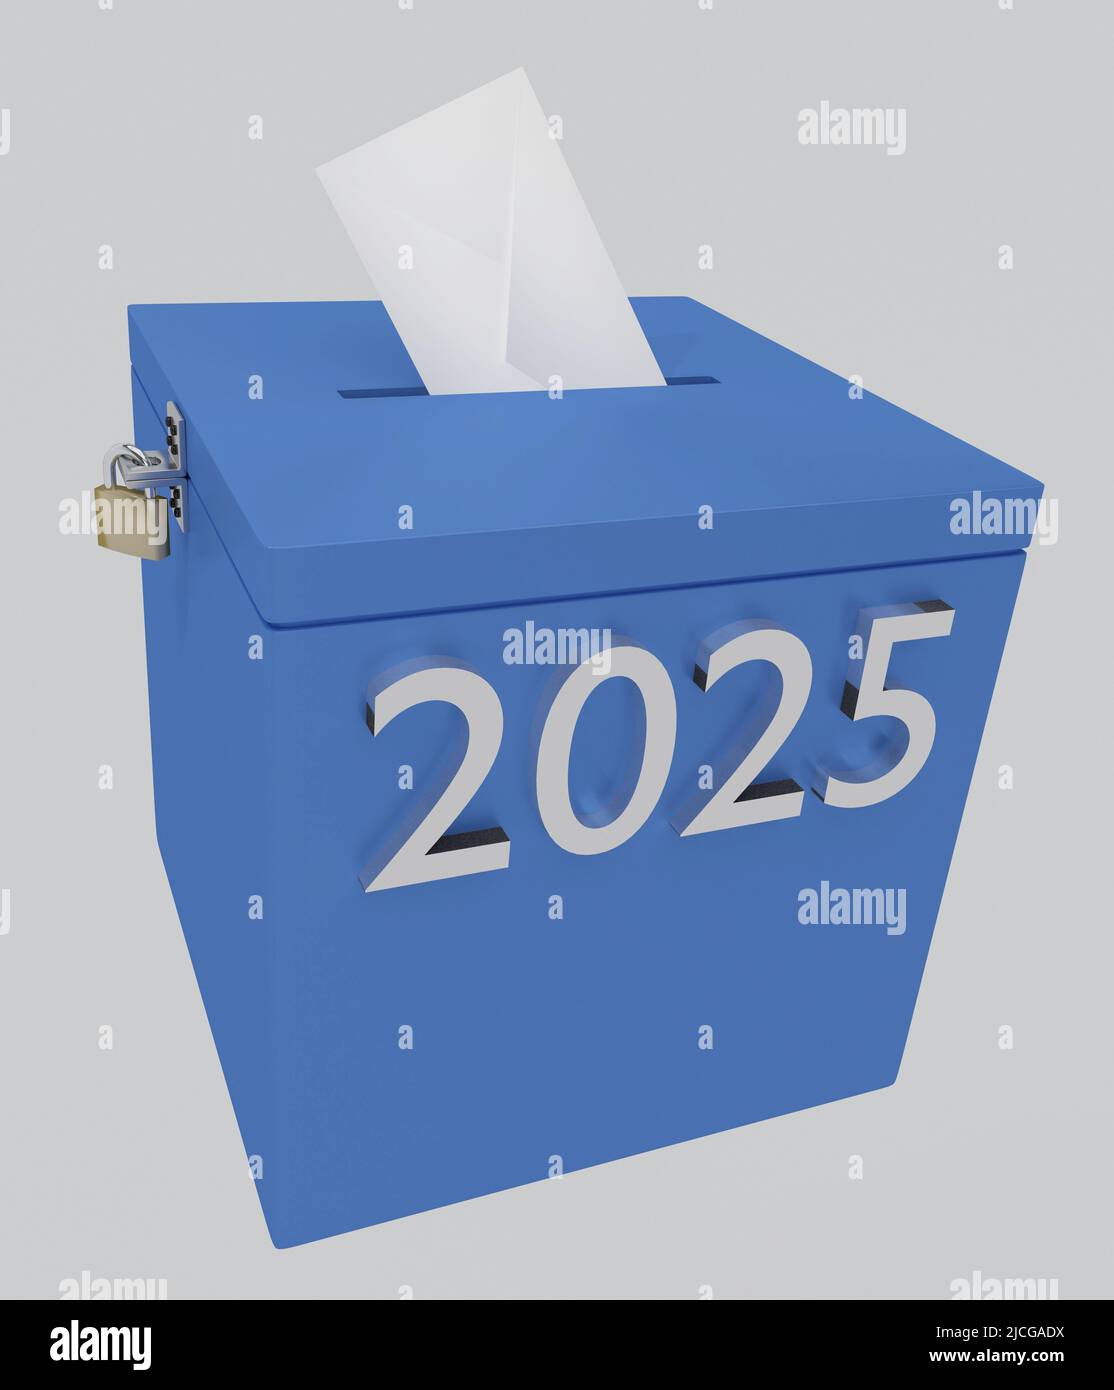 3D illustration of 2025 script on a ballot box, isolated on gray. Stock Photo